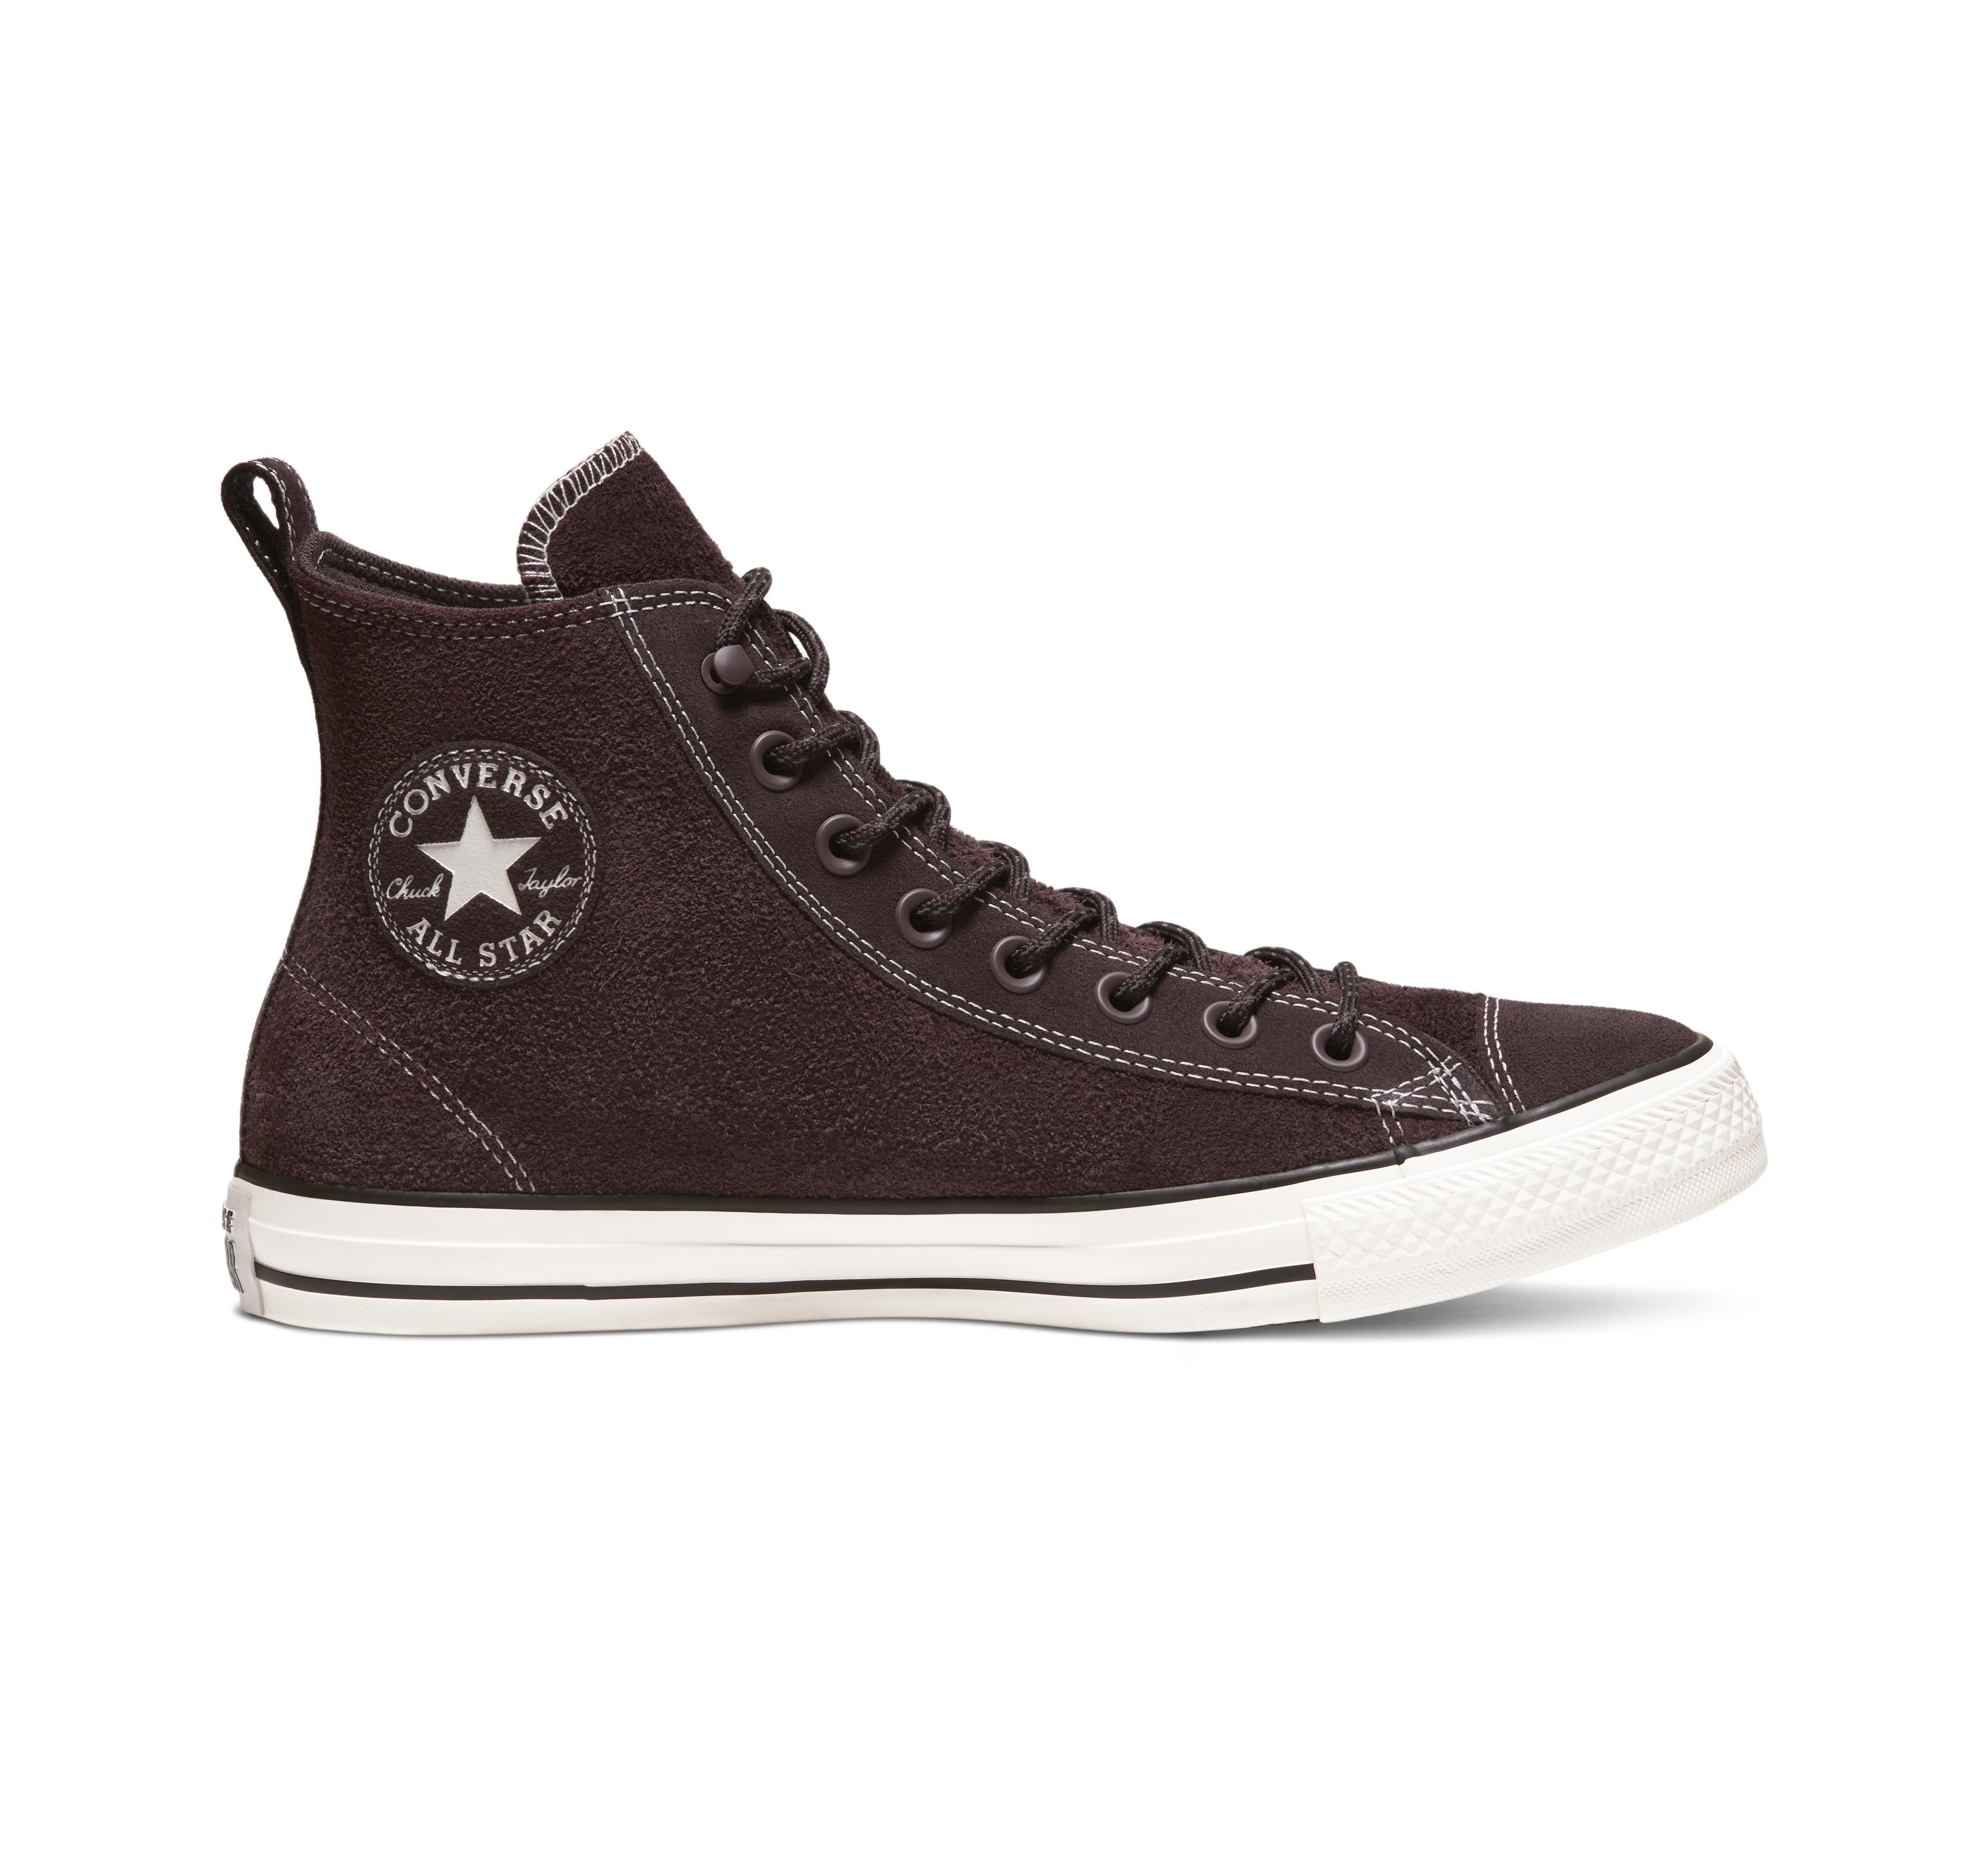 Converse Chuck Taylor All Star Suede High Top in Brown - Lyst